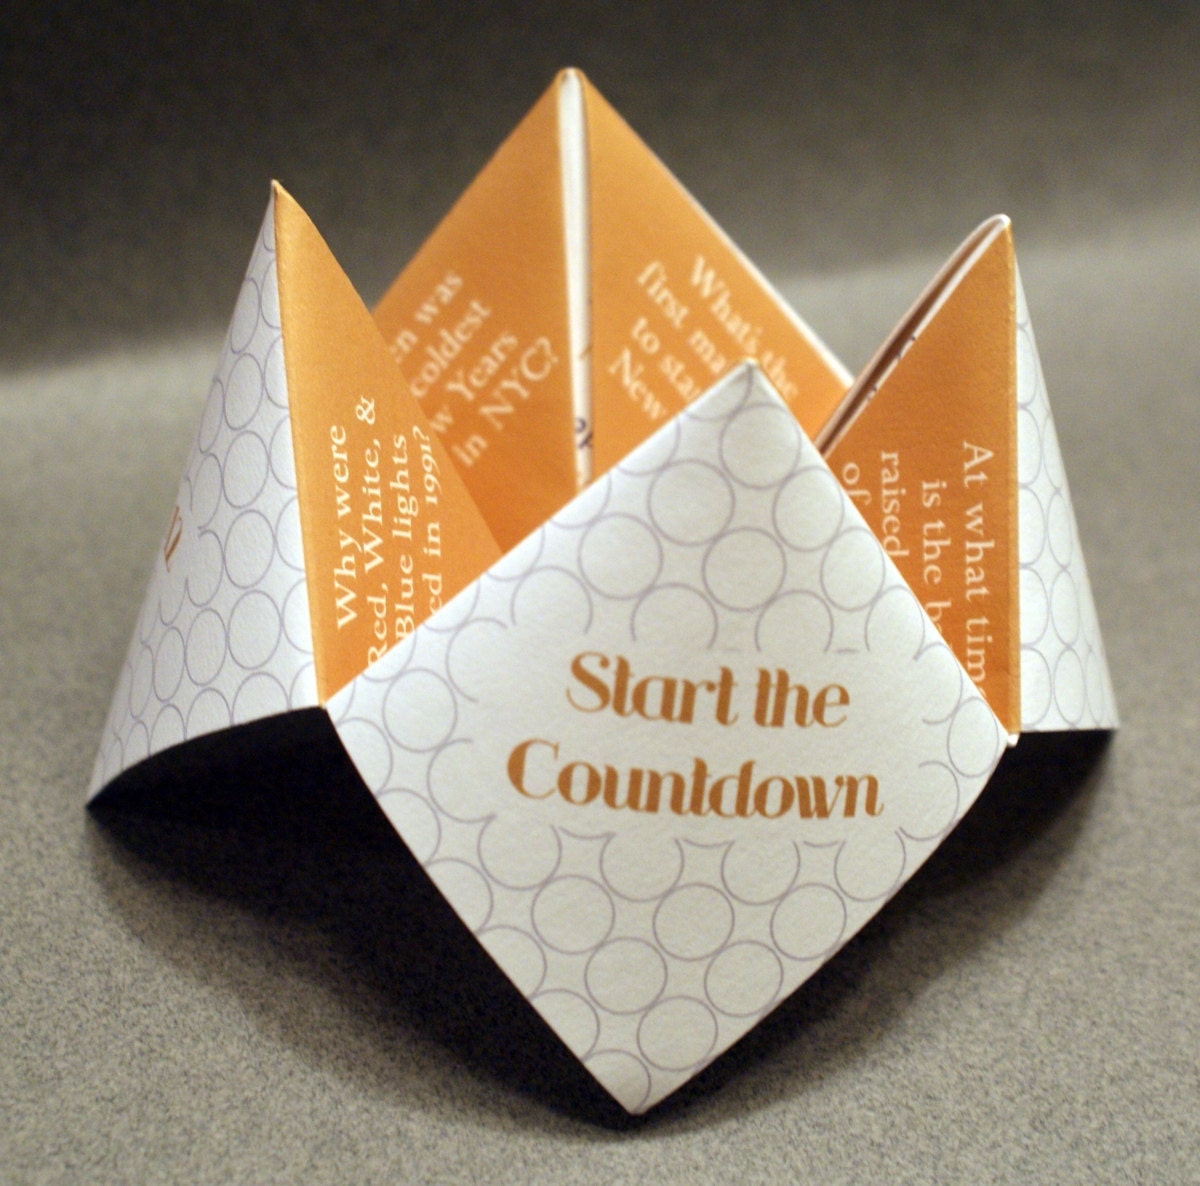 New Years Favor, New Years Card, New Years Decoration, Happy New Year, New Years Eve, Cootie Catcher